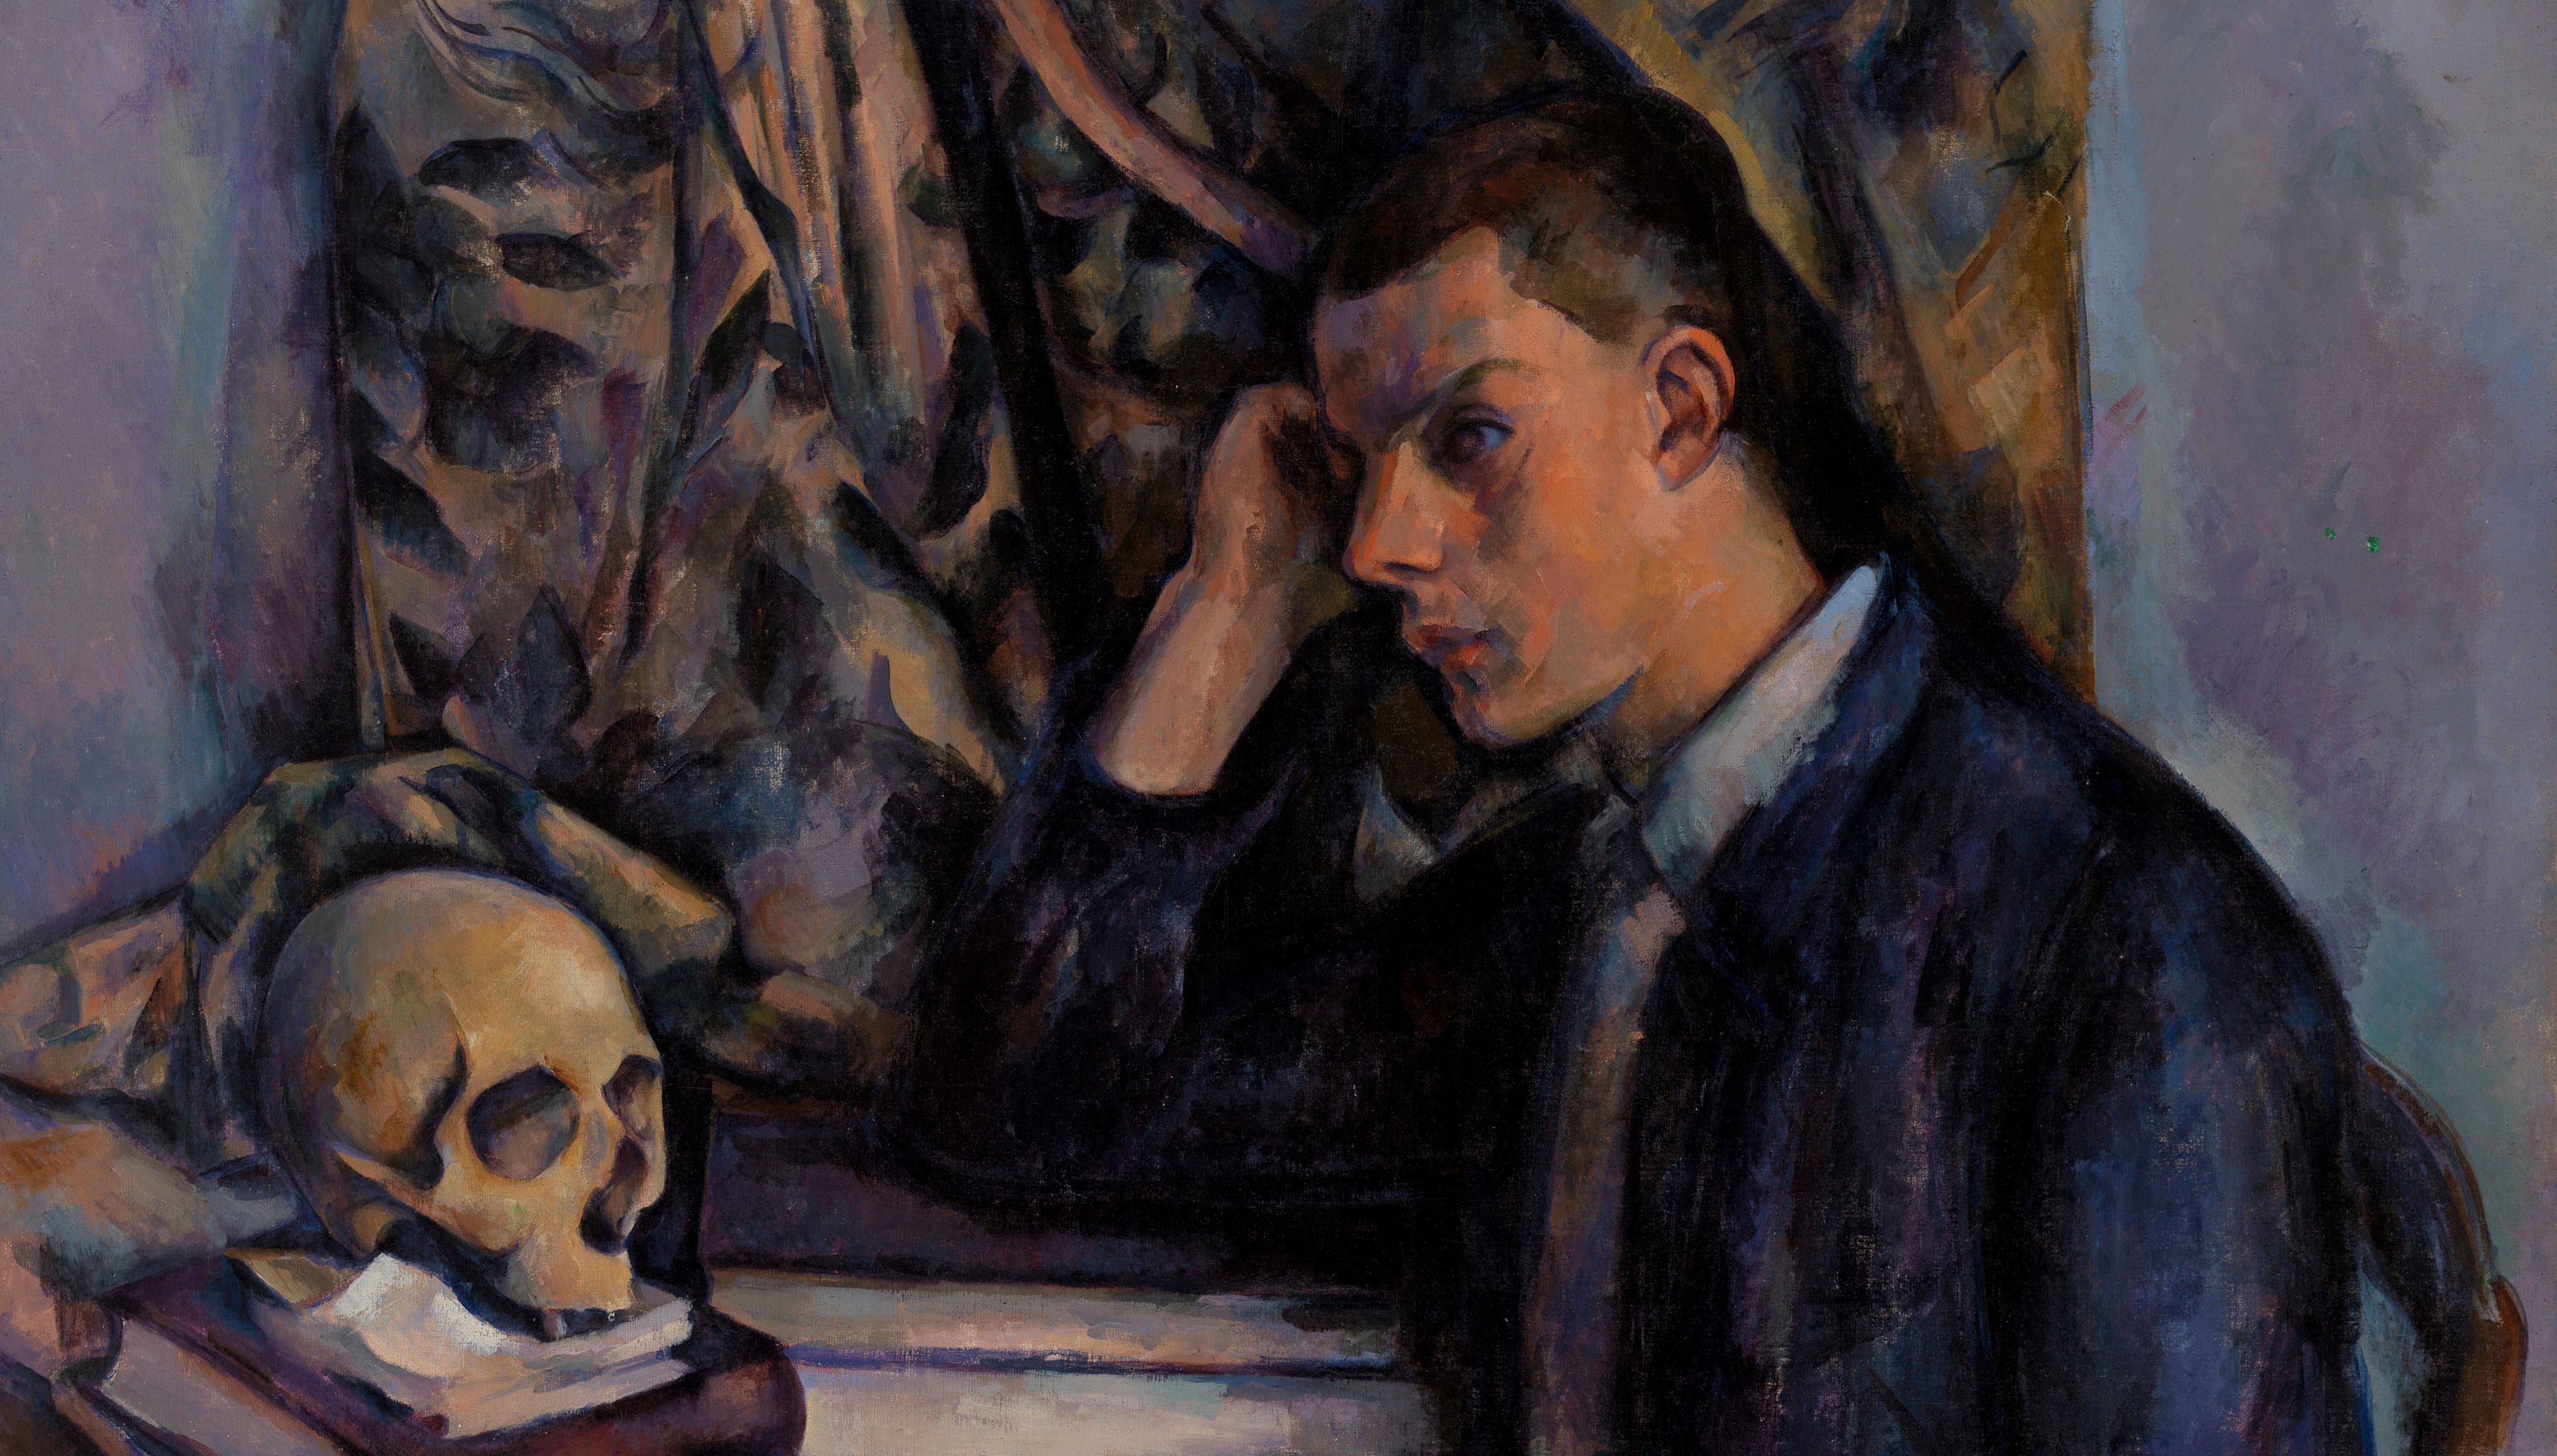 Painting - Young Man and Skull, Detail by Paul Cézanne (1898)